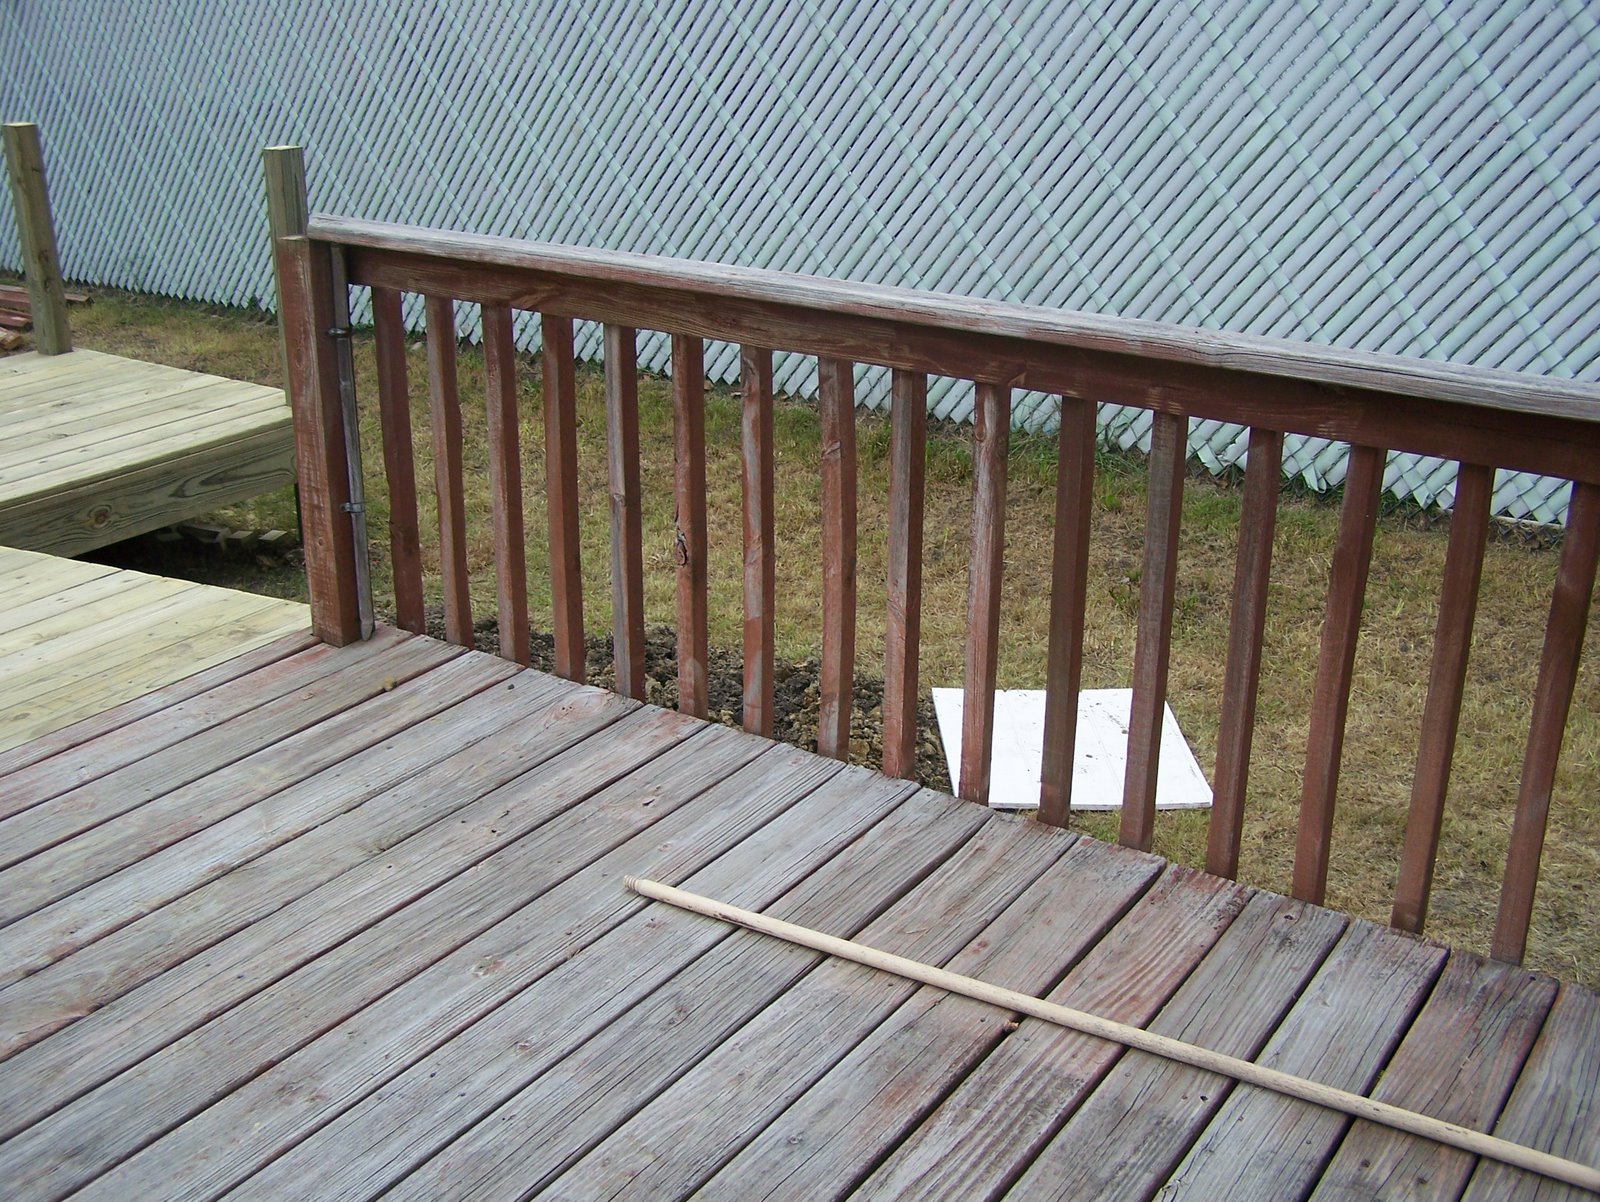 [ramp+will+go+around+this+right+corner+to+front+fence.jpg]